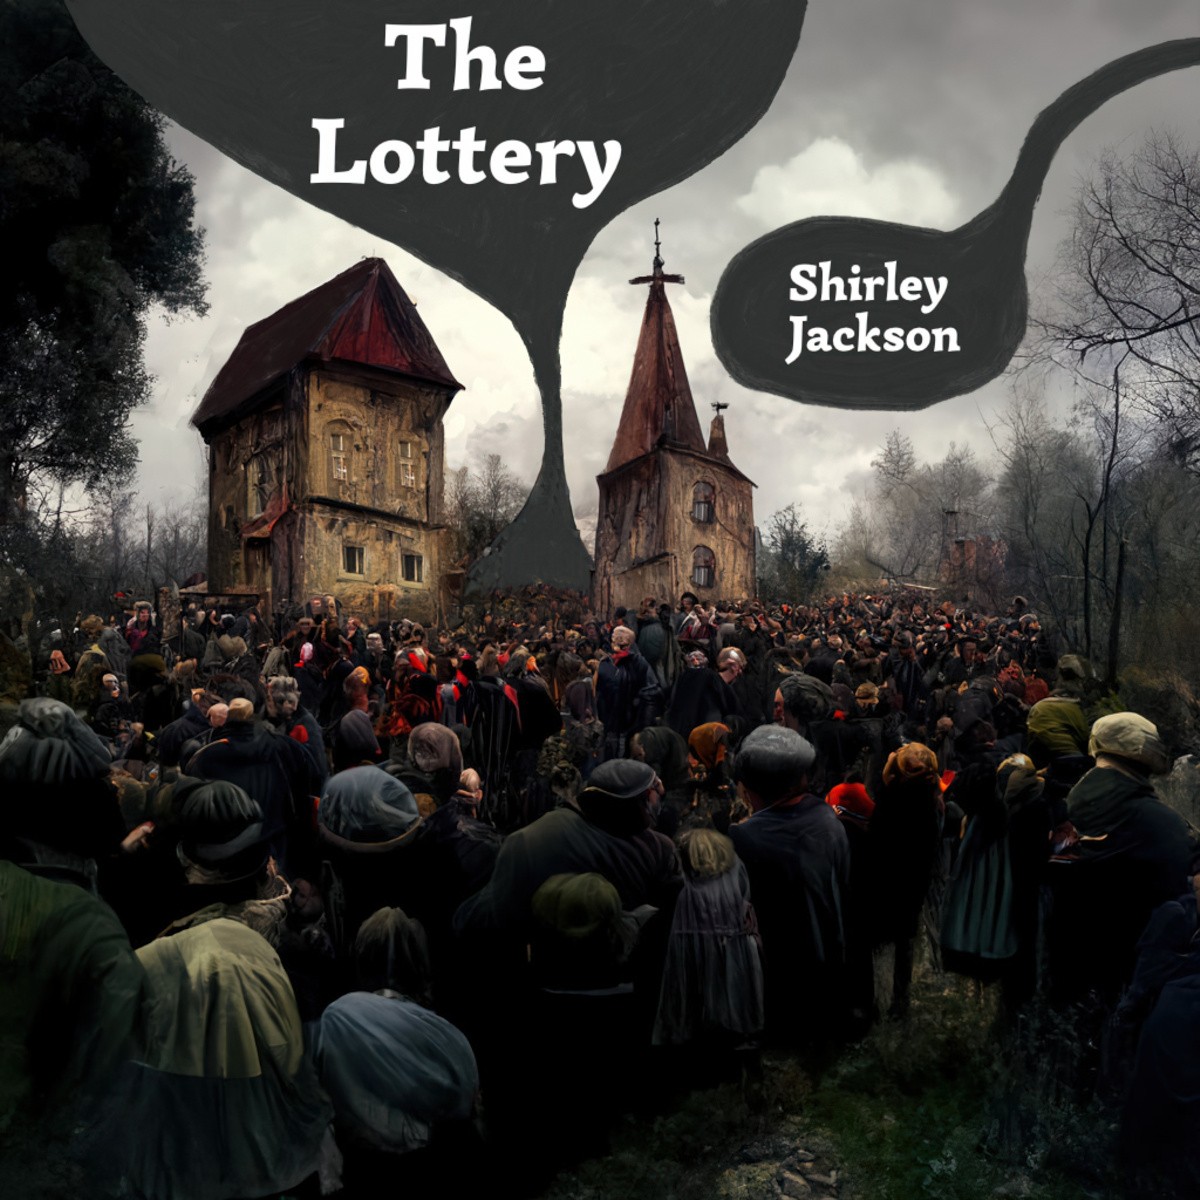 The Lottery by Shirley Jackson Short Story Analysis